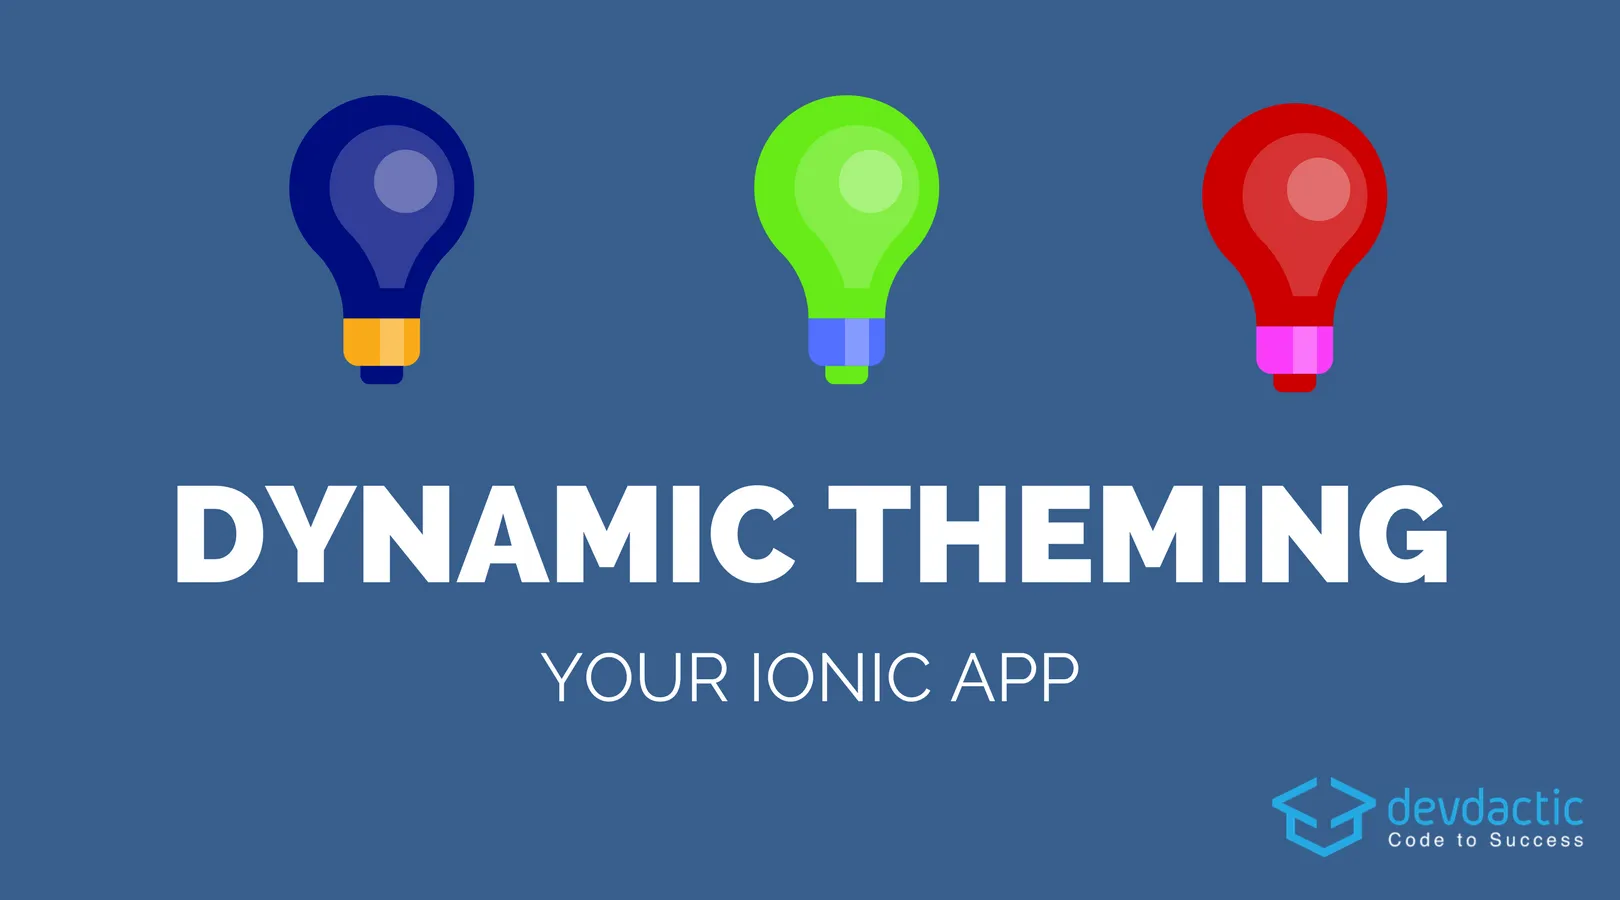 Dynamic Theming Your Ionic App